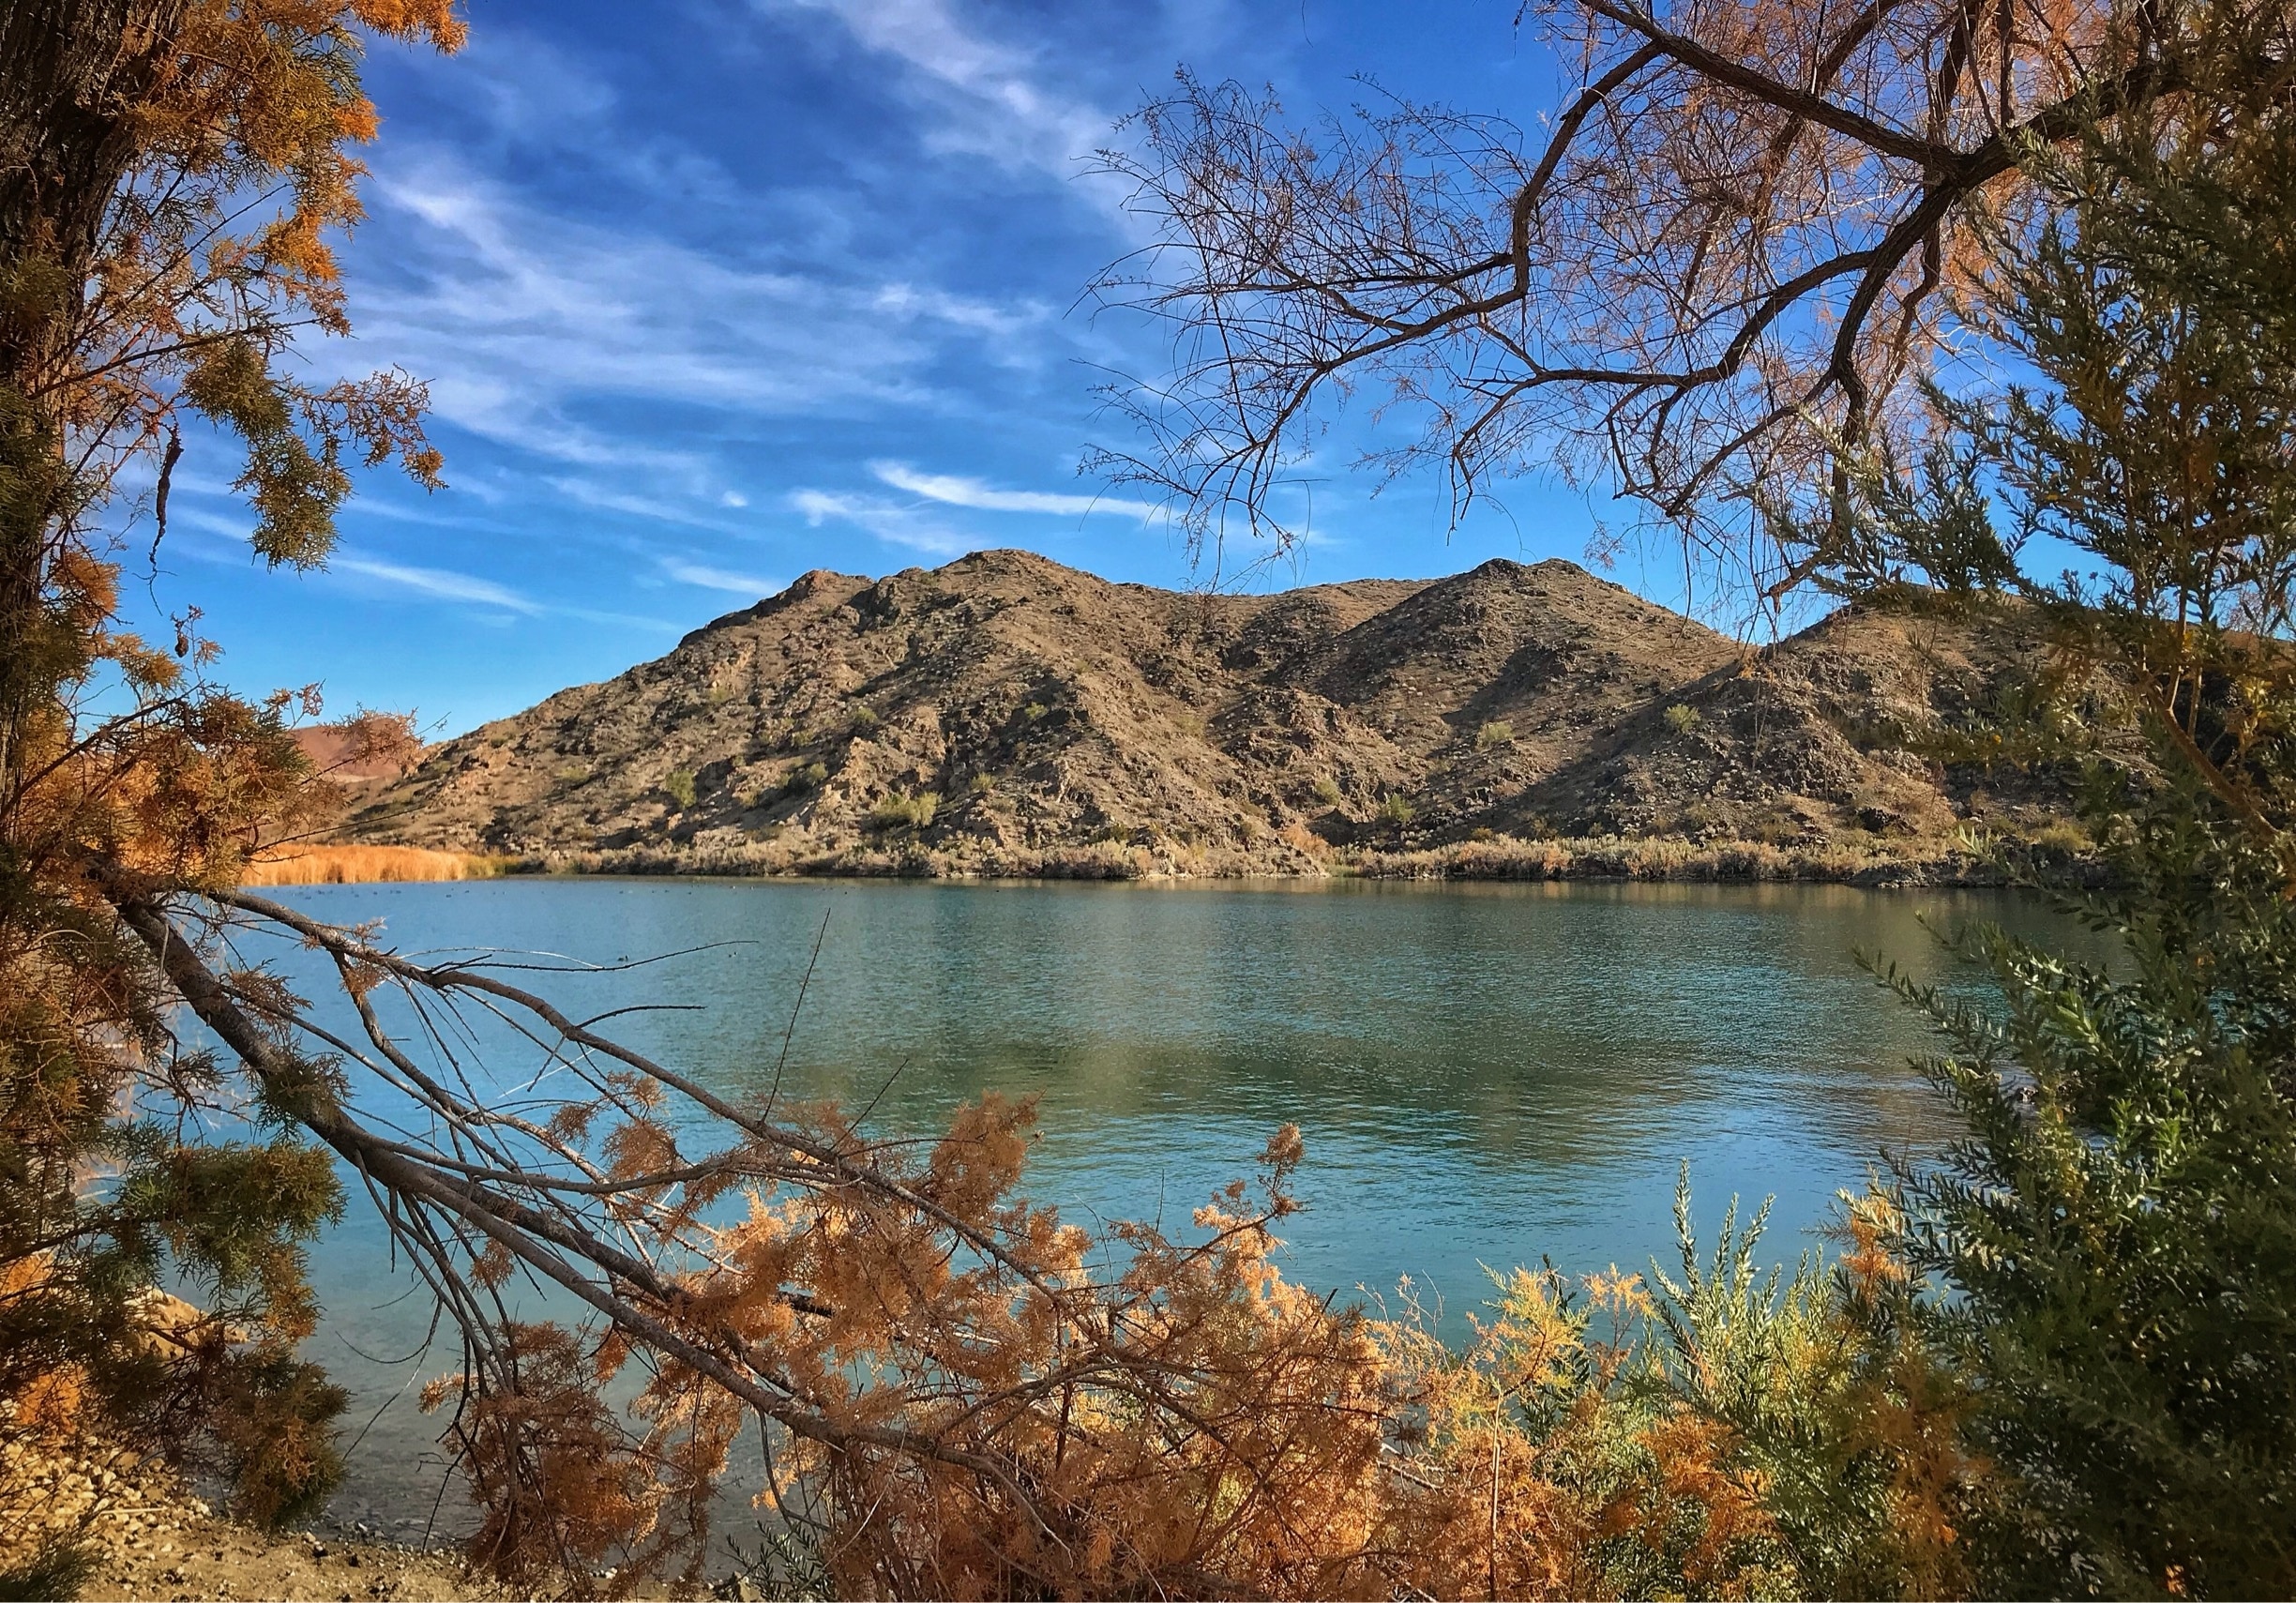 Started out looking for tabletop but ended up making our own trail to this lovely spot on Lake Havasu. Very quiet spot for a lunch break.
#takeahike #weekendgetaway